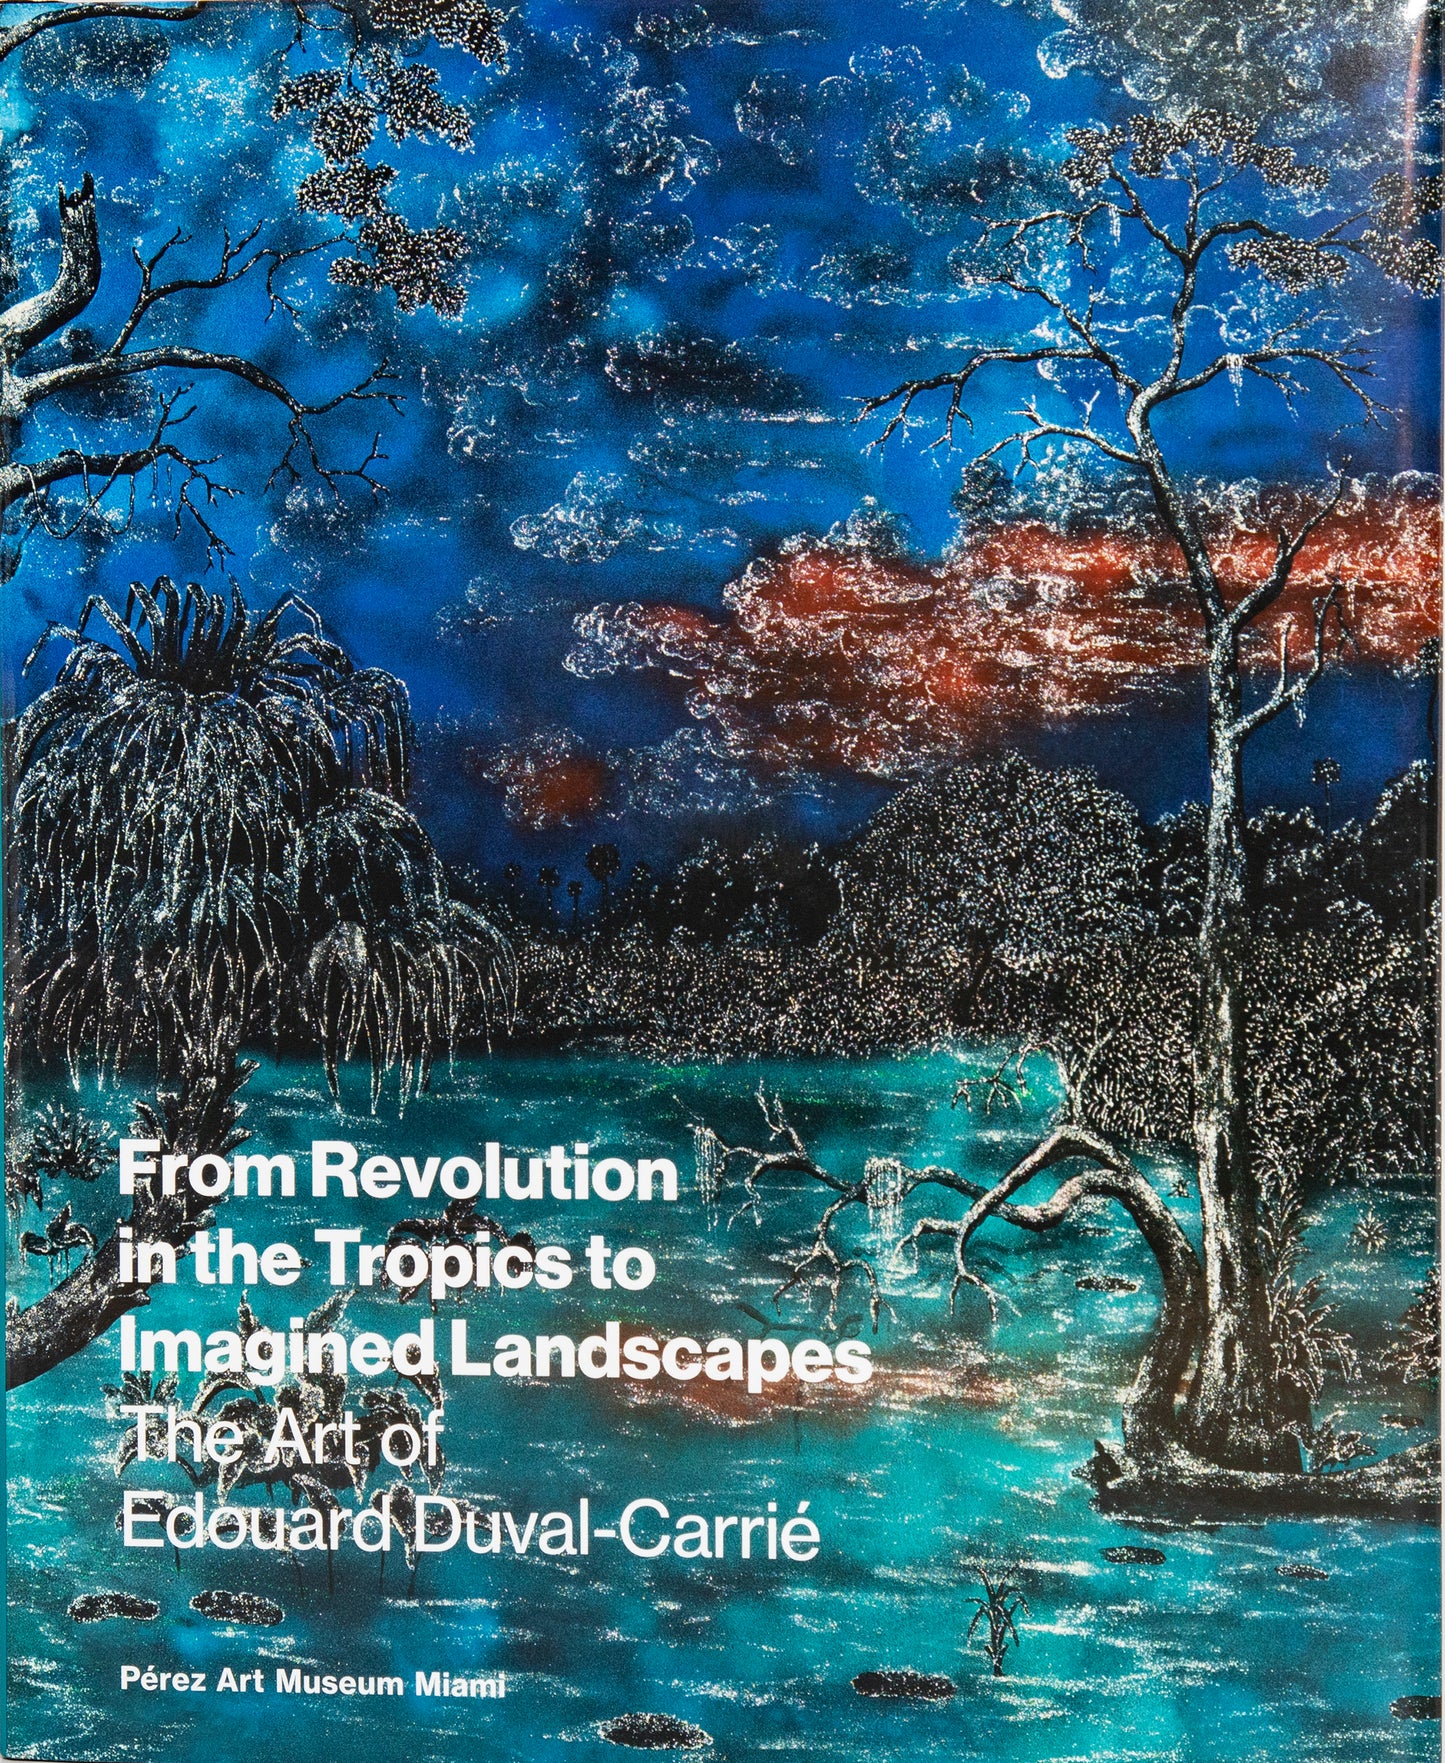 From Revolution in the Tropics to Imagined Landscapes: the Art of Edouard Duval-Carrié